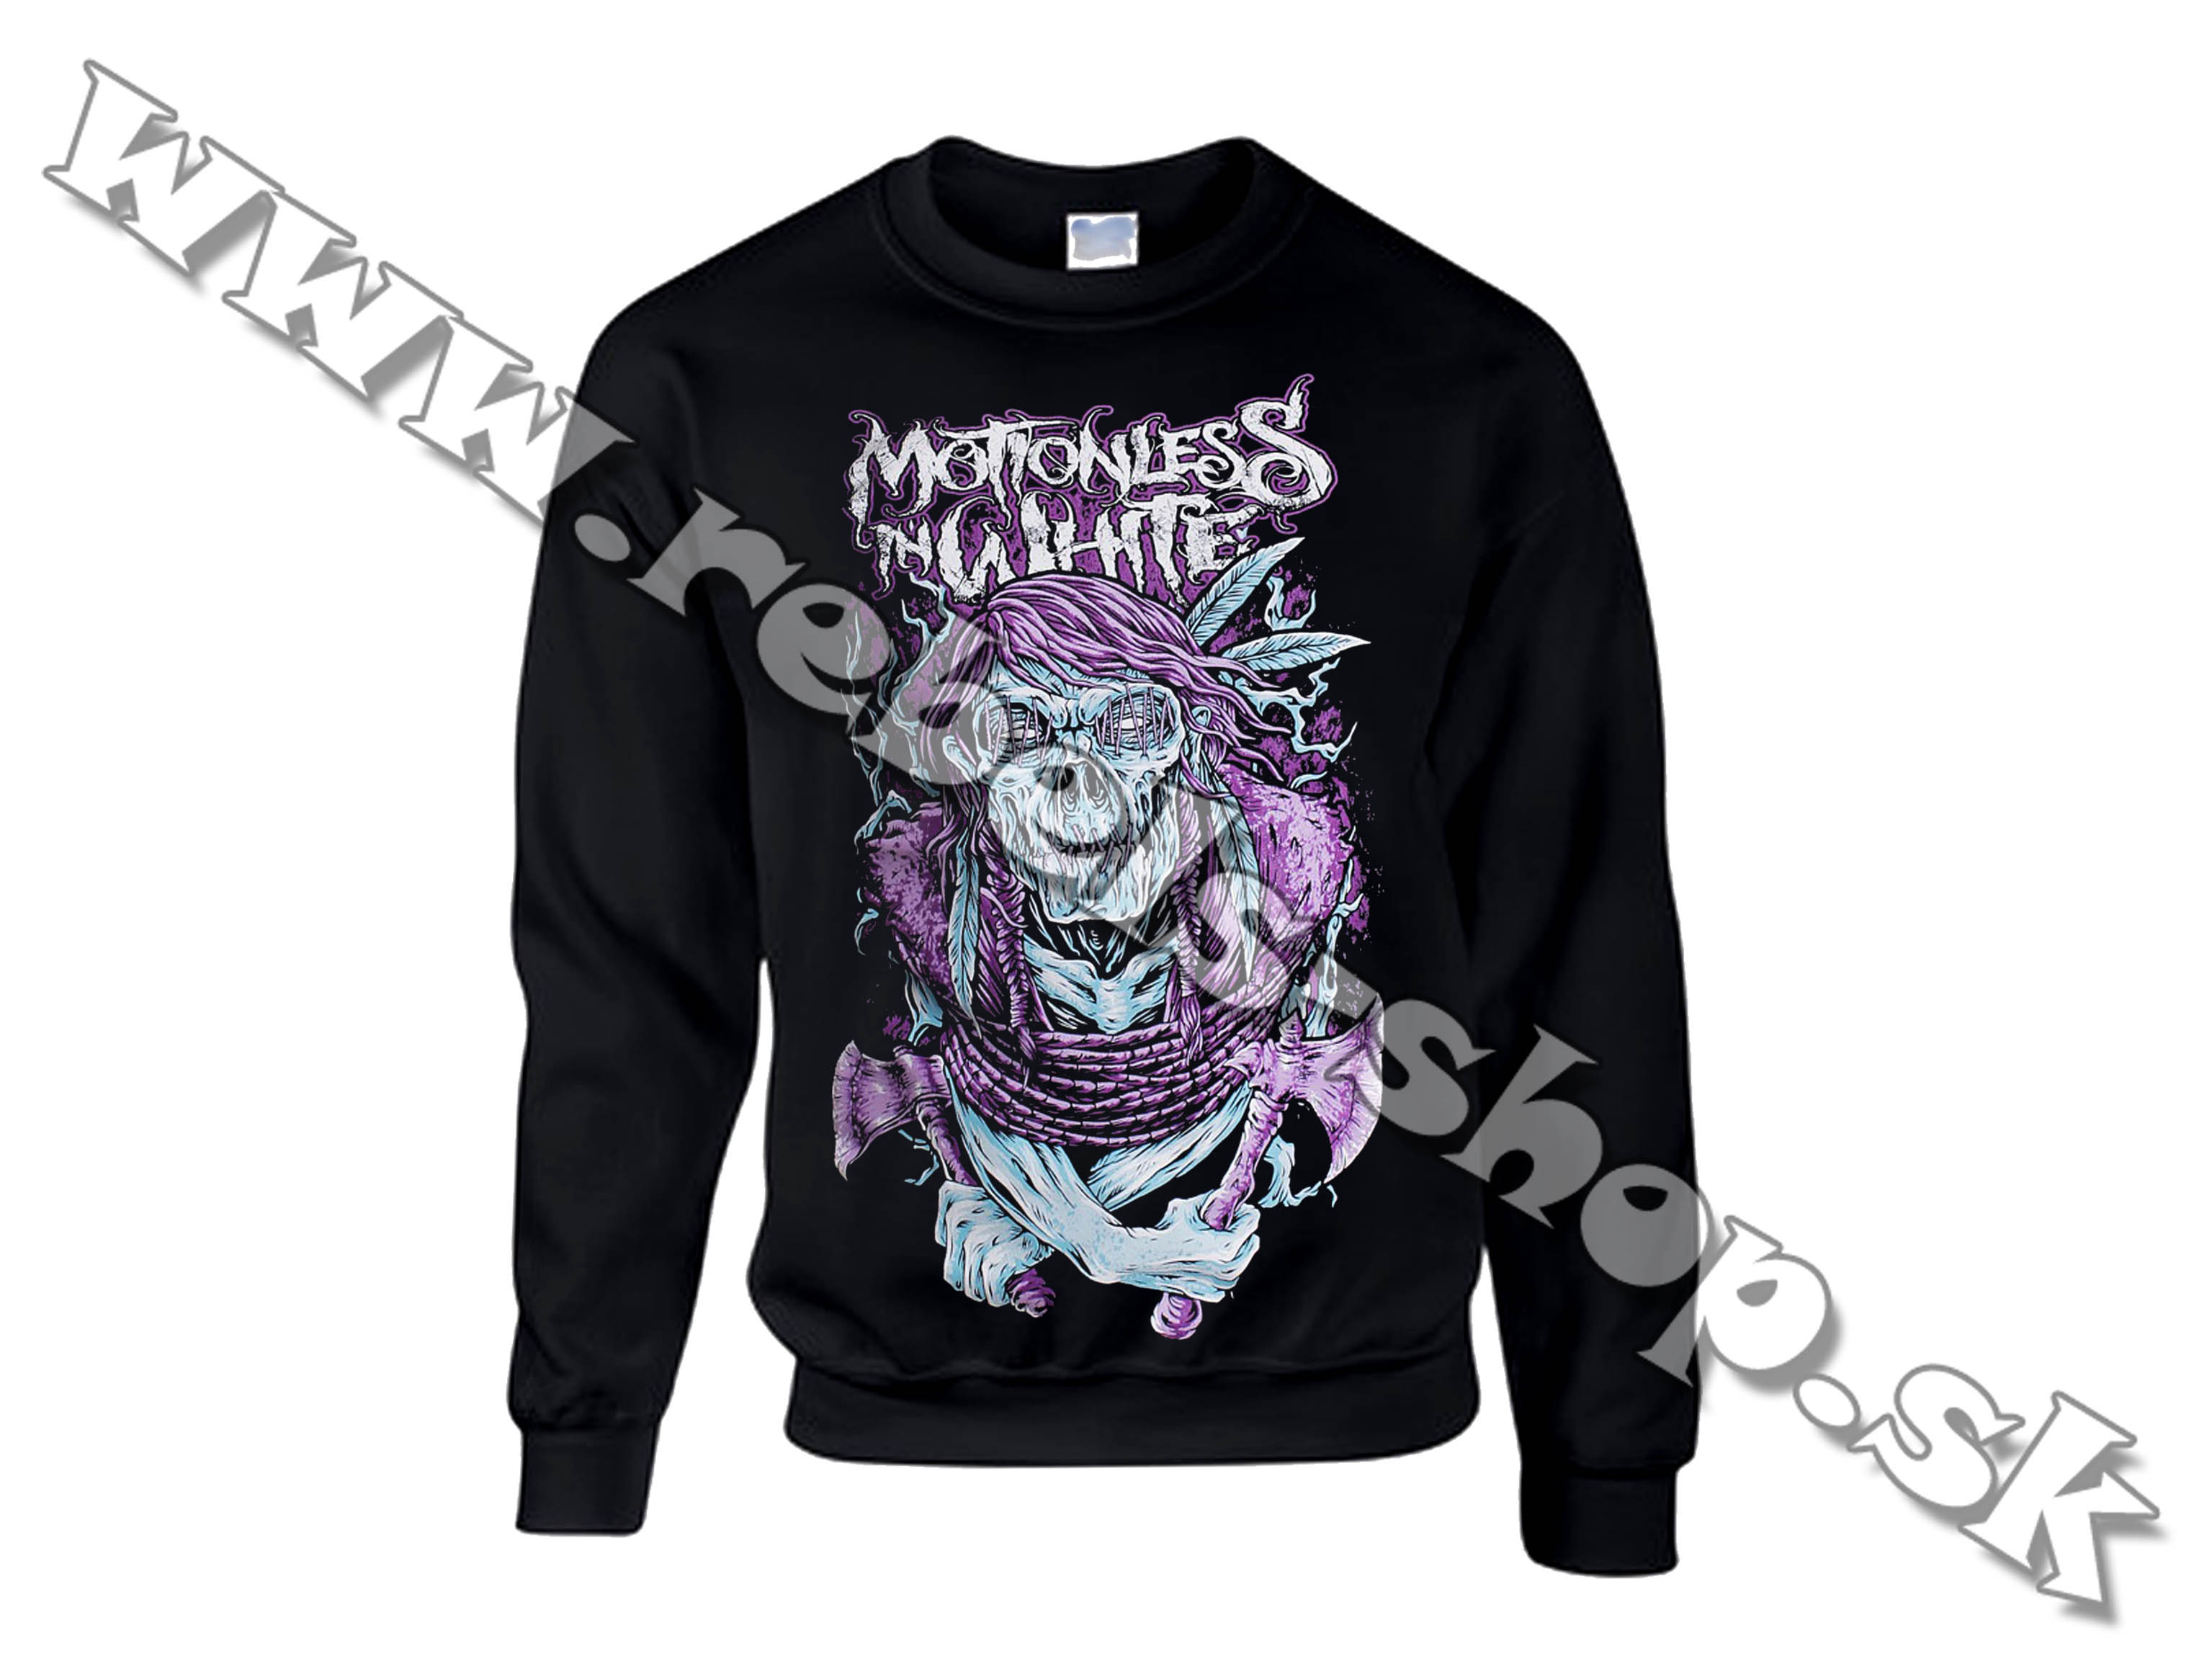 Mikina "Motionless In White"